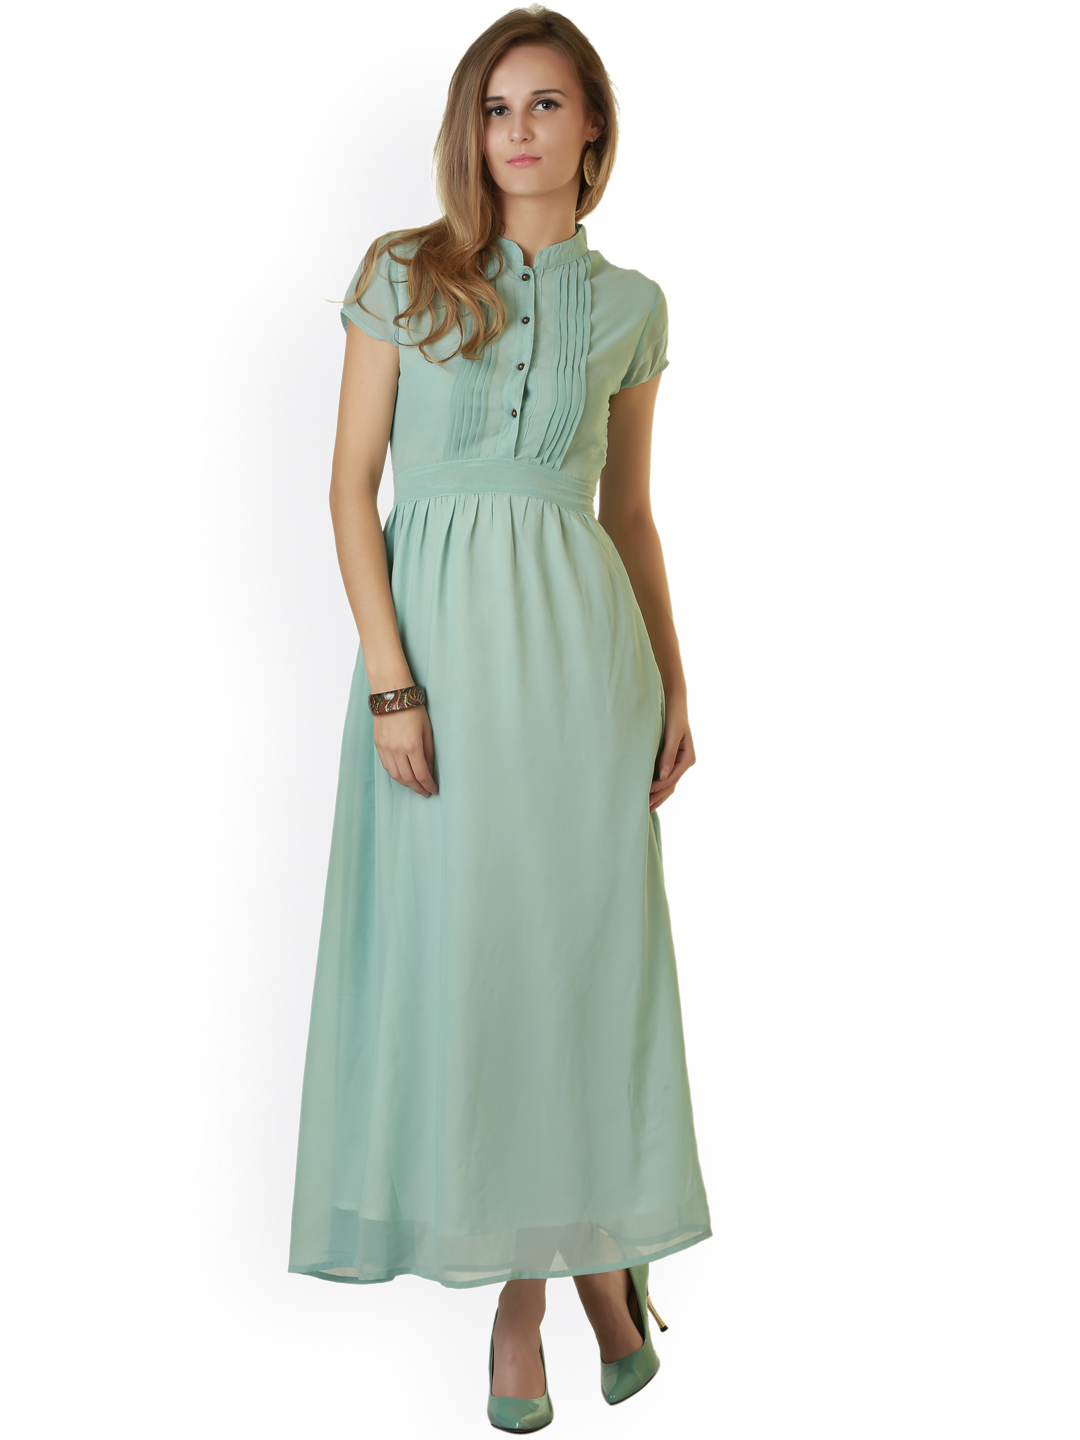 Belle Fille Light Blue Maxi Dress Price in India